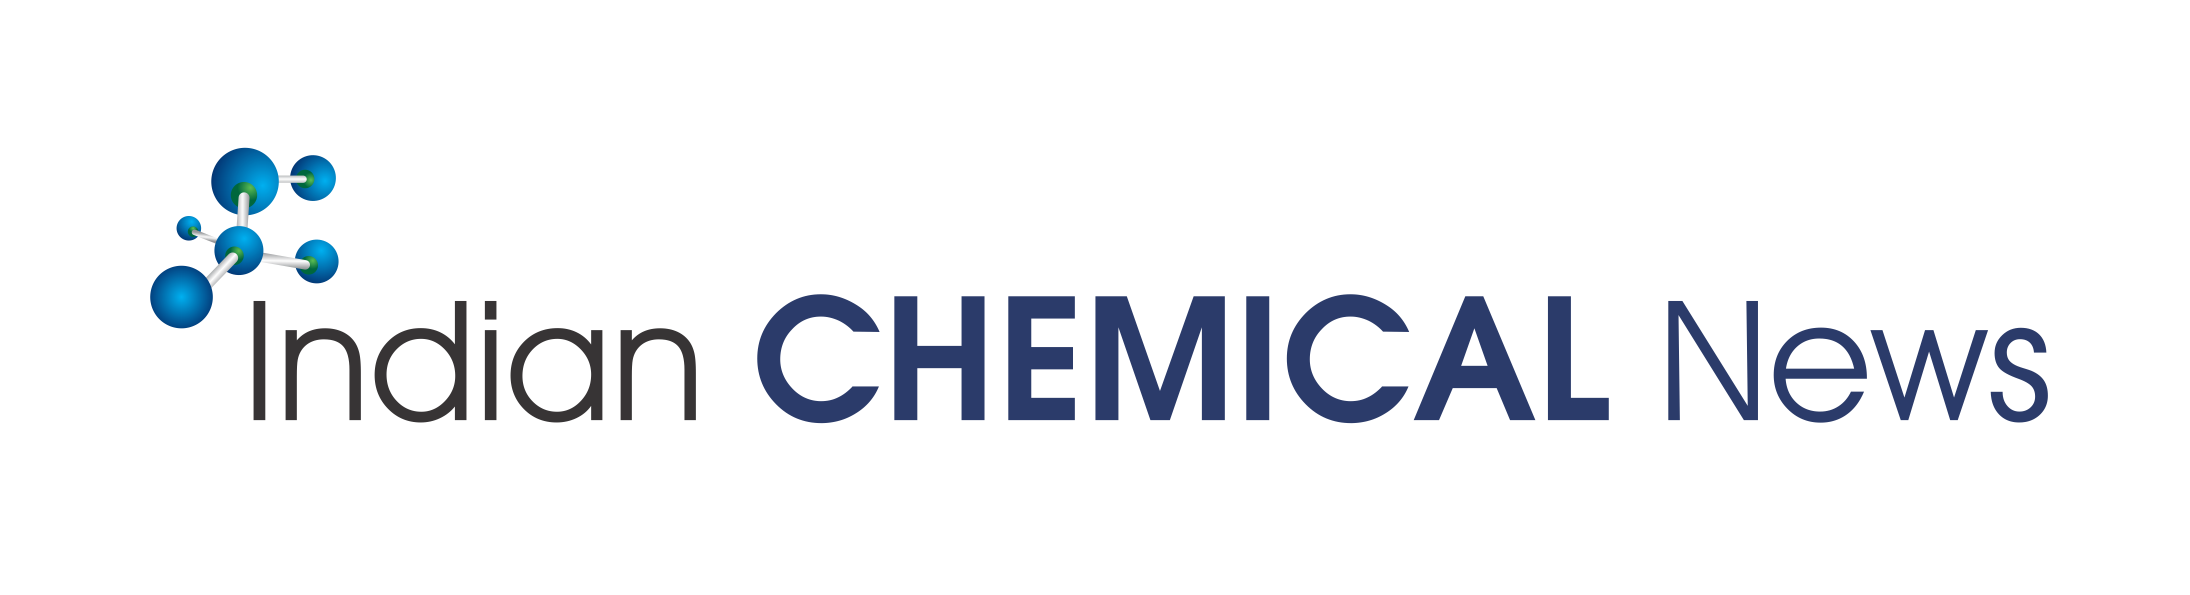 Indian Chemical News